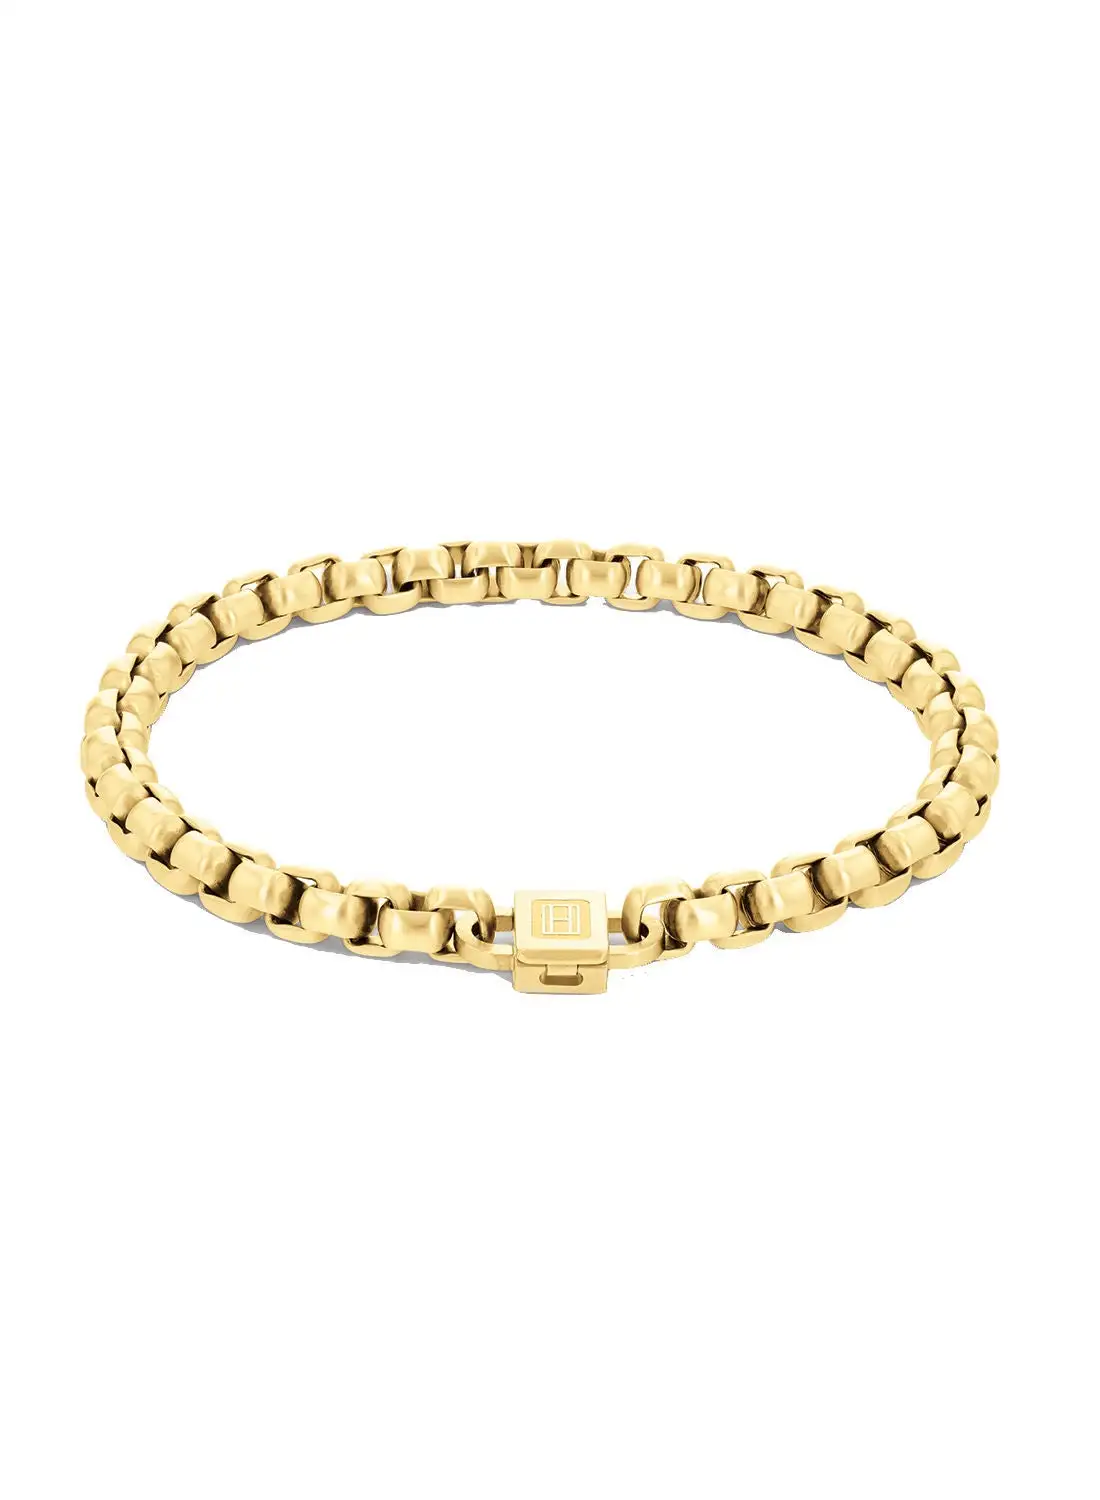 TOMMY HILFIGER Mens Chain Necklace Ionic Gold Plated Steel Bracelet- 2790368